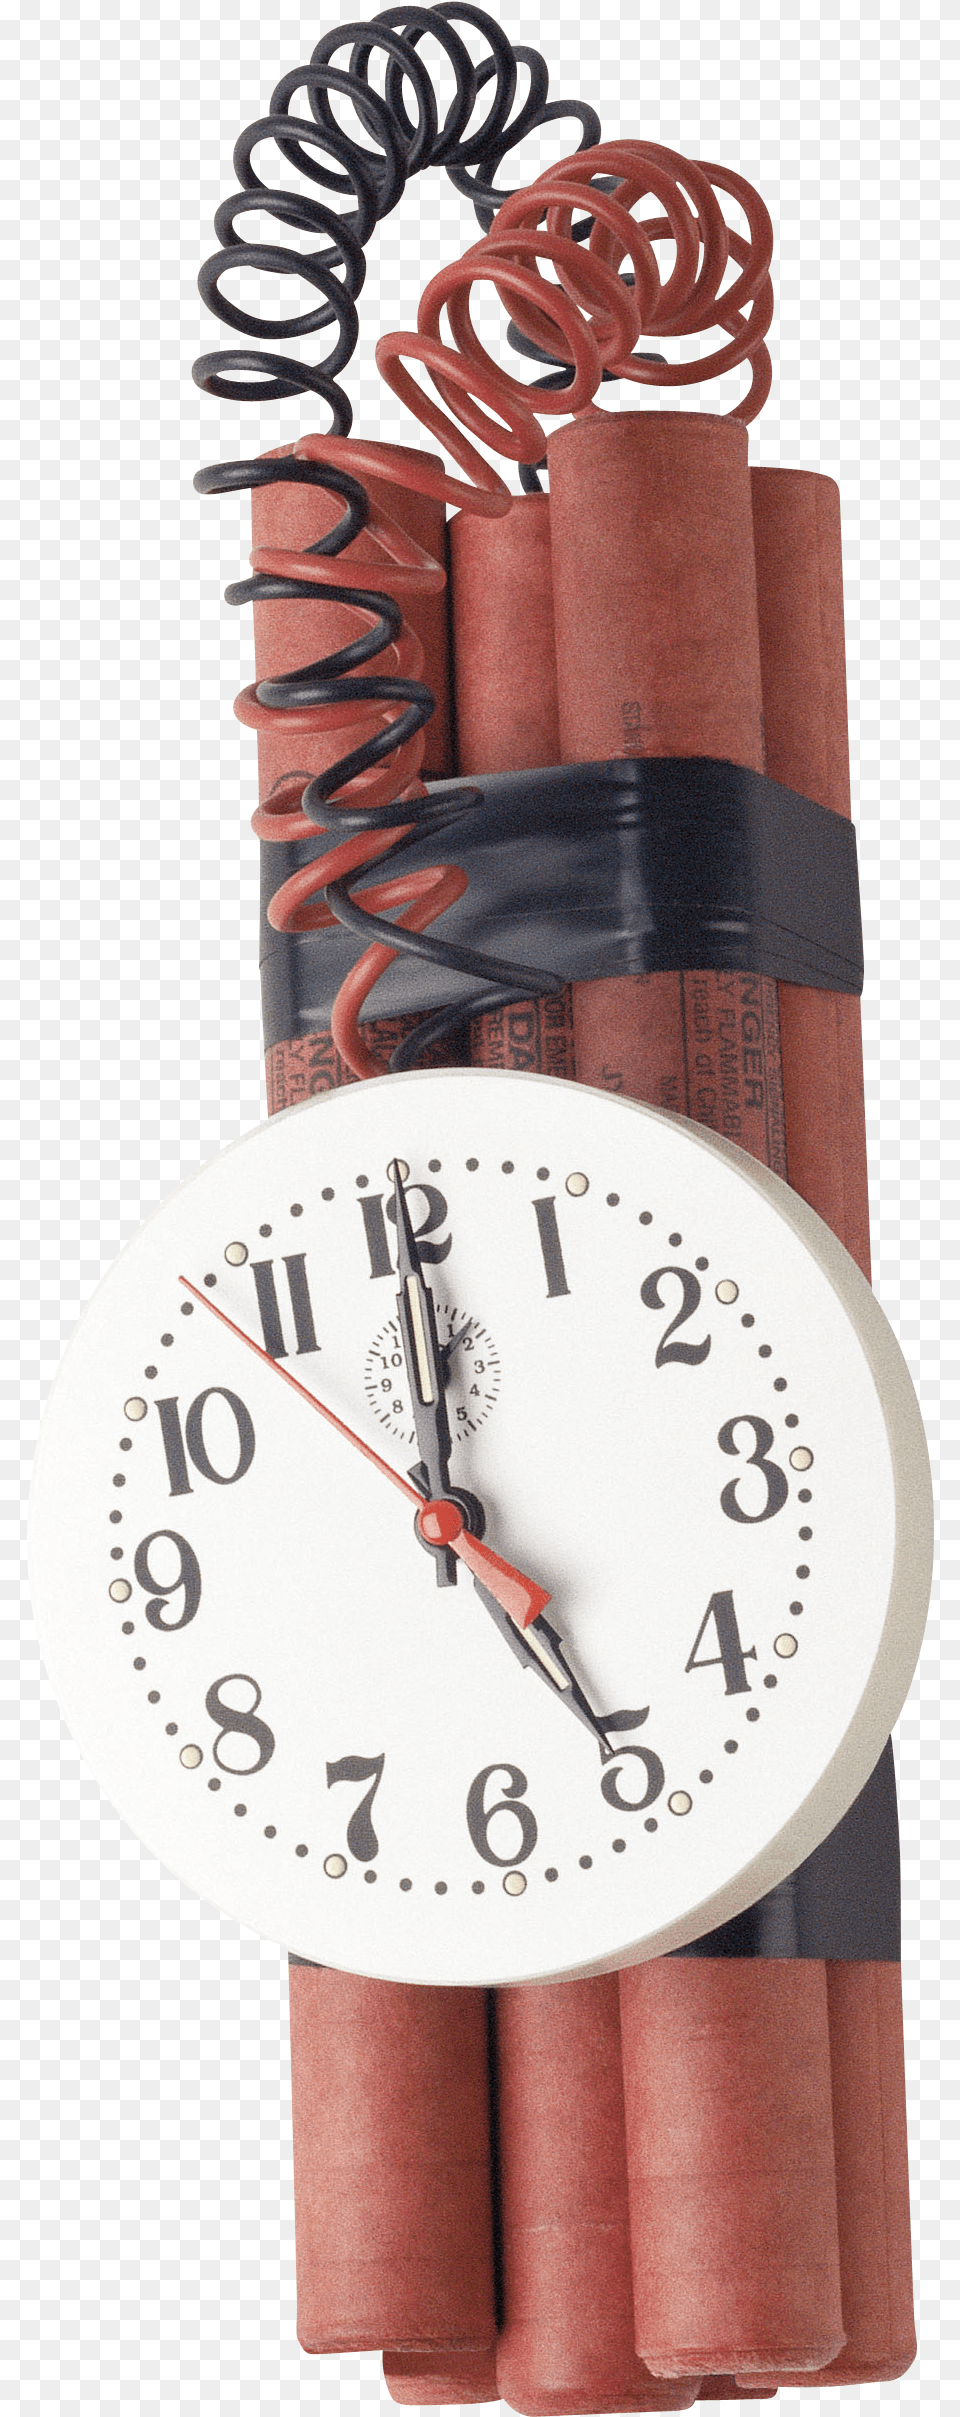 Time Bomb Clock Dynamite Time Bomb Transparent Background, Weapon Png Image